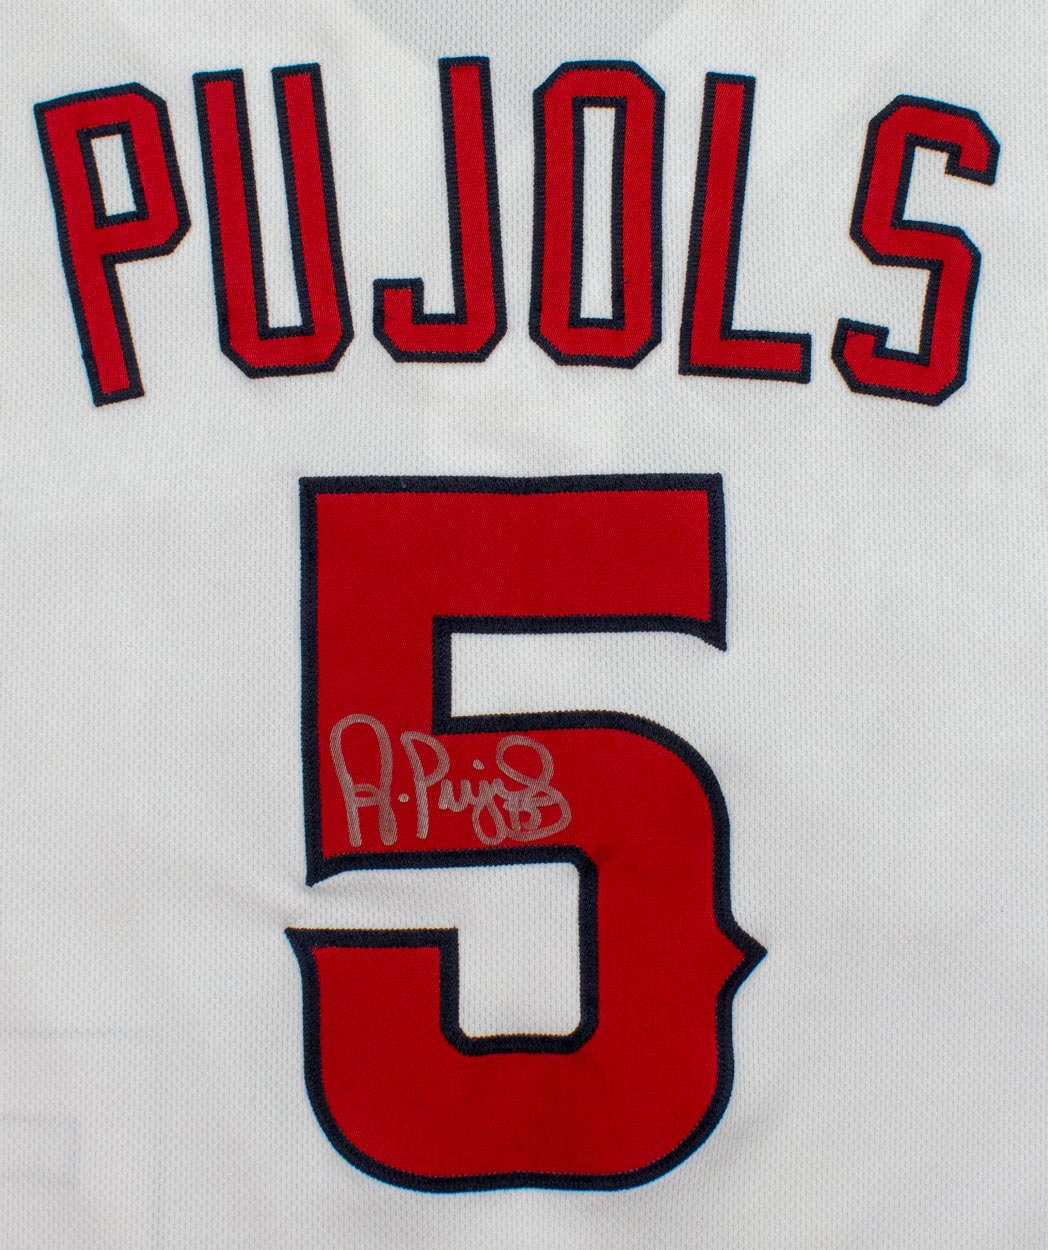 Albert Pujols Game-Used Jersey from 8/14/20 Game vs. LAD - Size